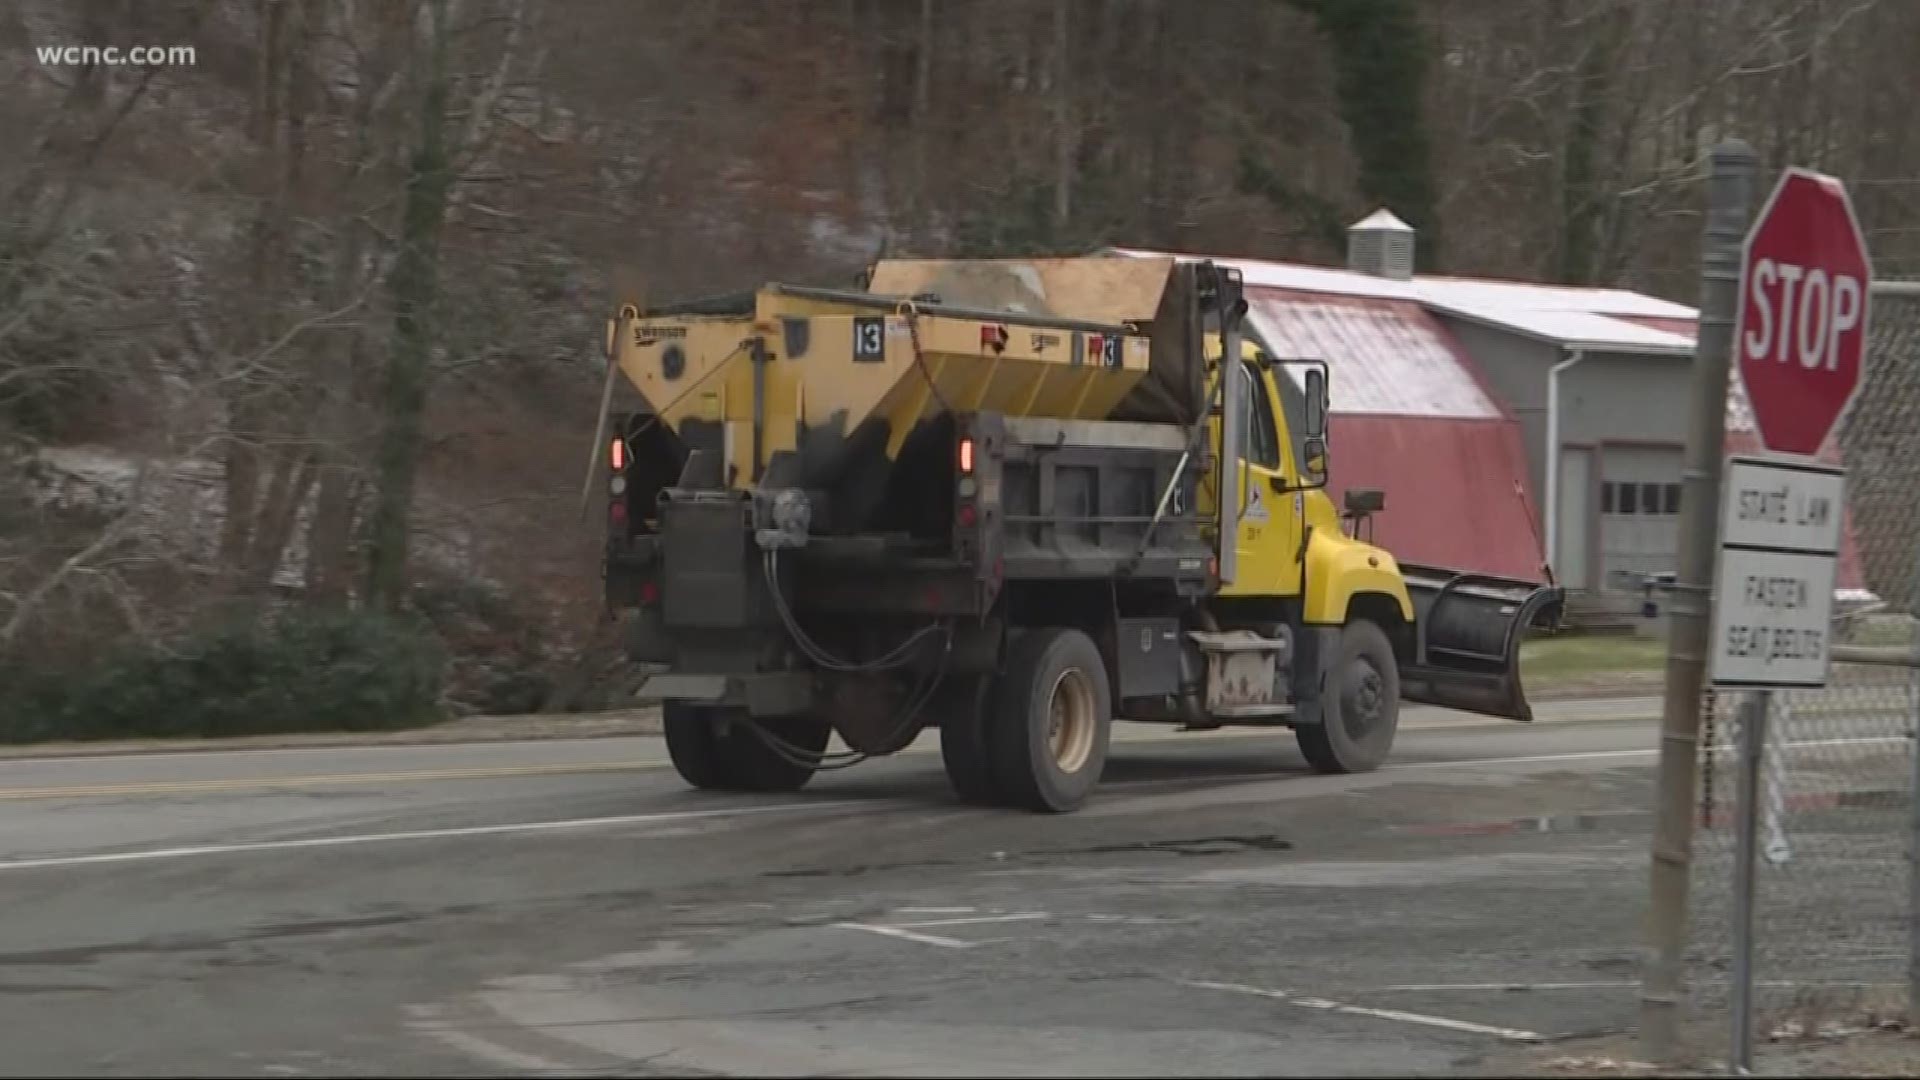 NCDOT's Watauga County maintenance engineer, Kevin Whittington, said the worst of the conditions were Tuesday morning when slick roads led to several crashes.